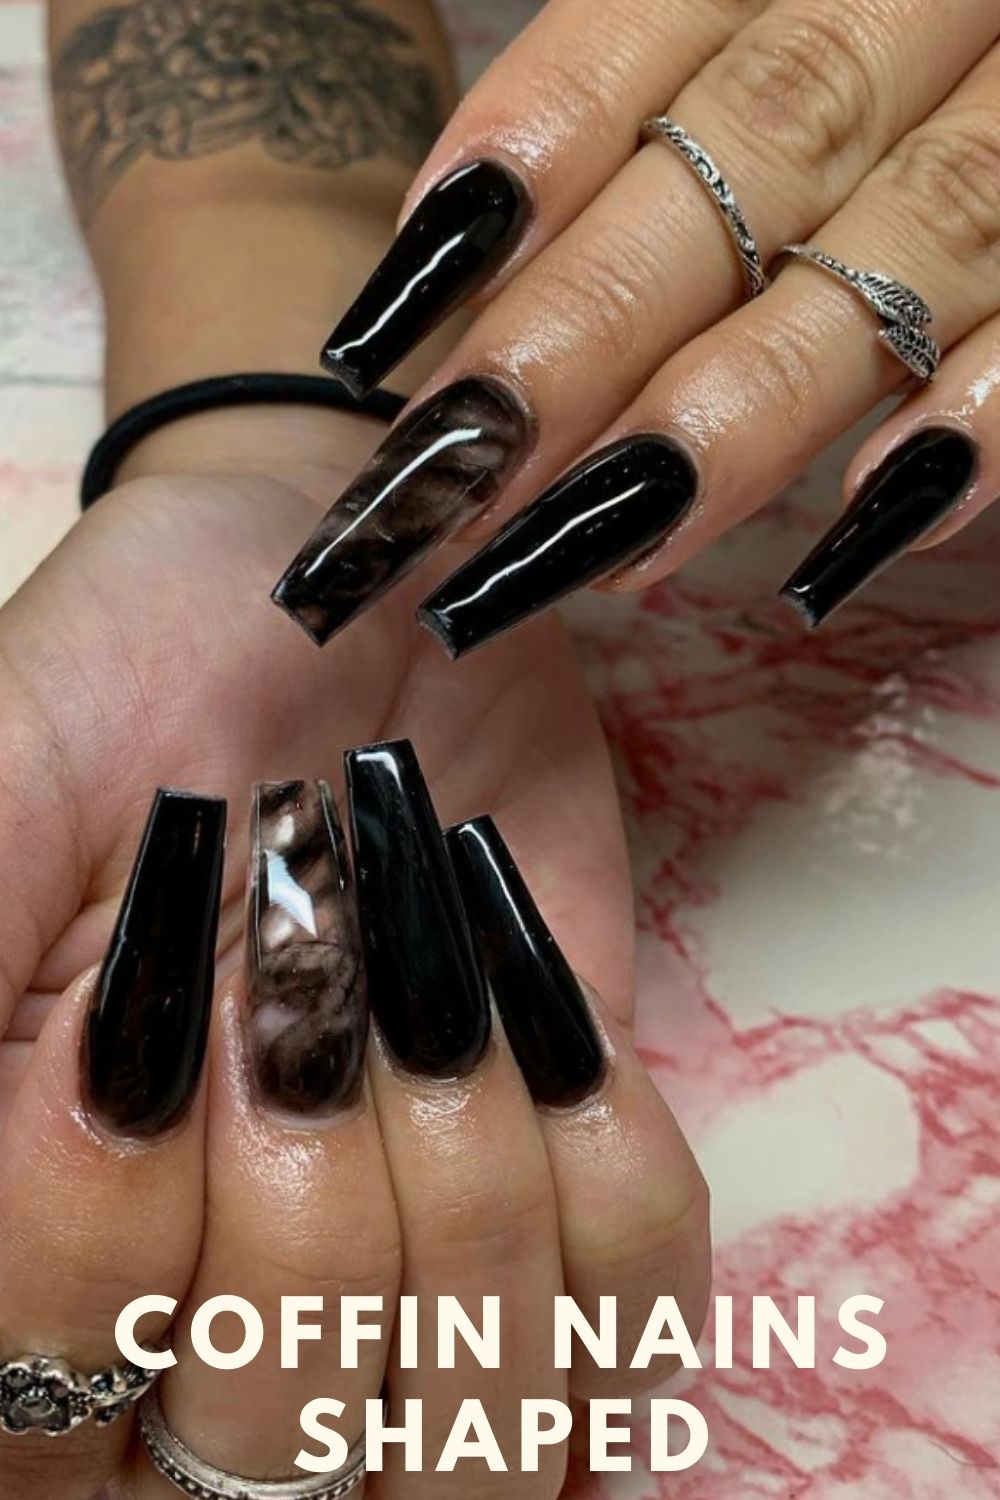 45 Aesthetic Coffin Nails Art Design You Must Try in the summer 2021